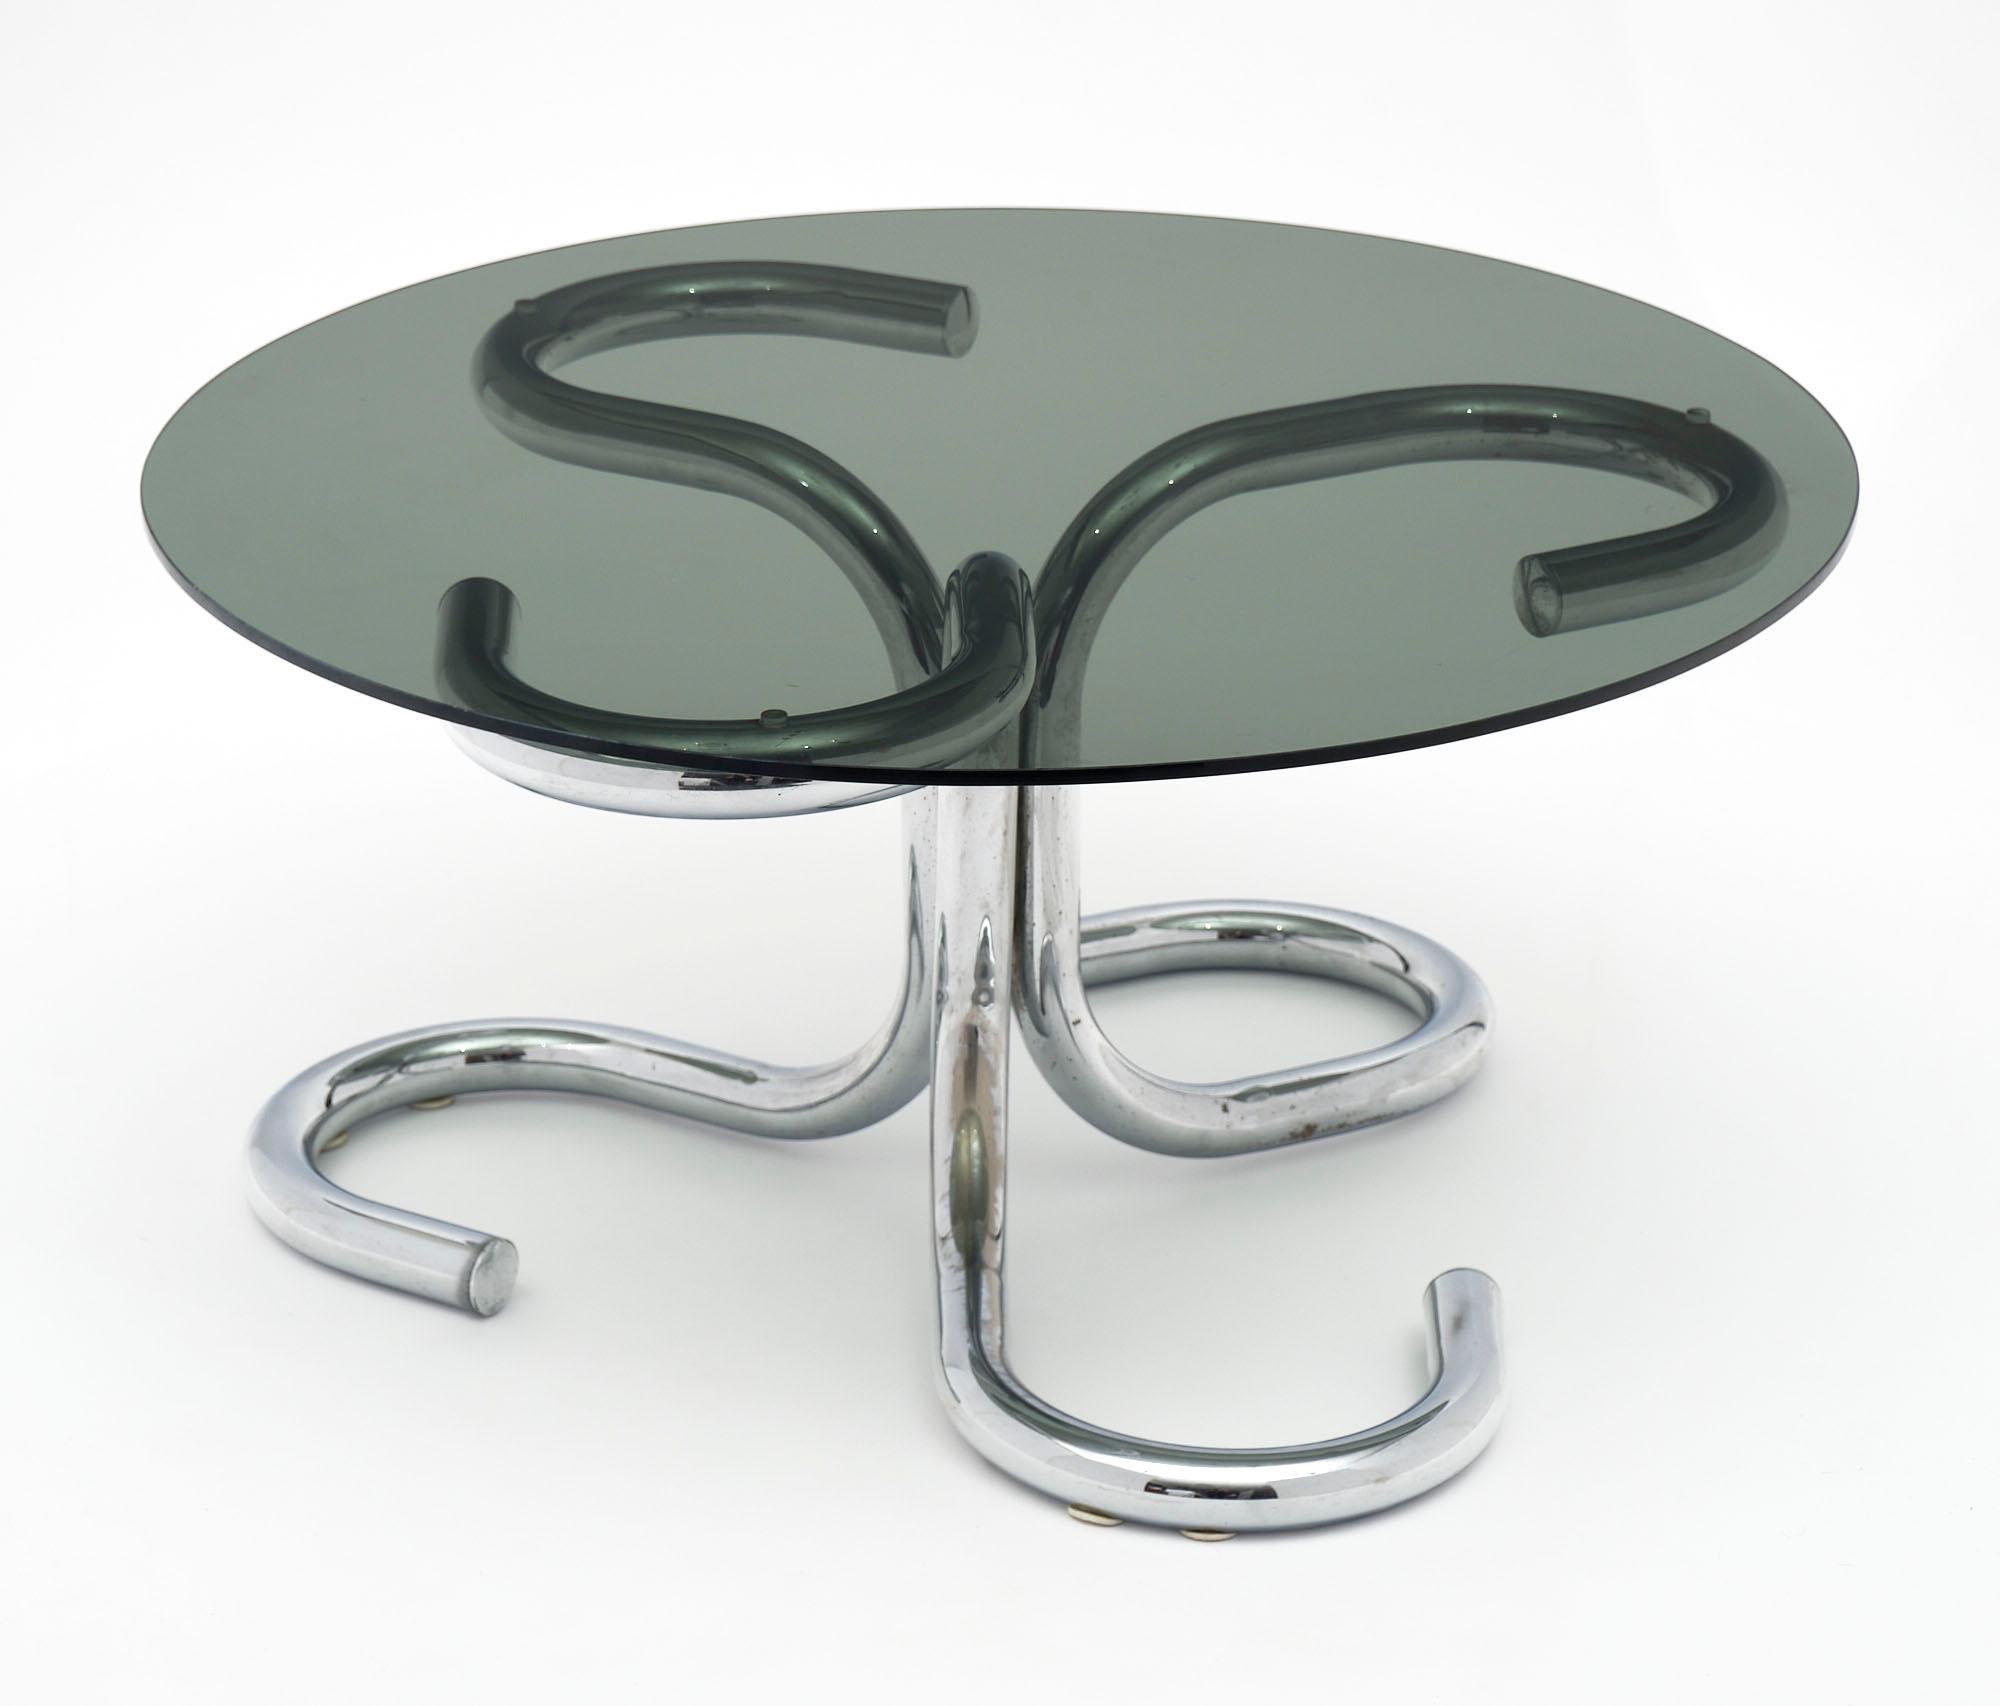 Sinuous chrome tube and glass coffee table in the spirit of Paul Tuttle’s “anaconda” coffee table for Strässle International. Three conjoining large diameter chrome tubes in a snake like design with chrome caps and a smoked glass top.